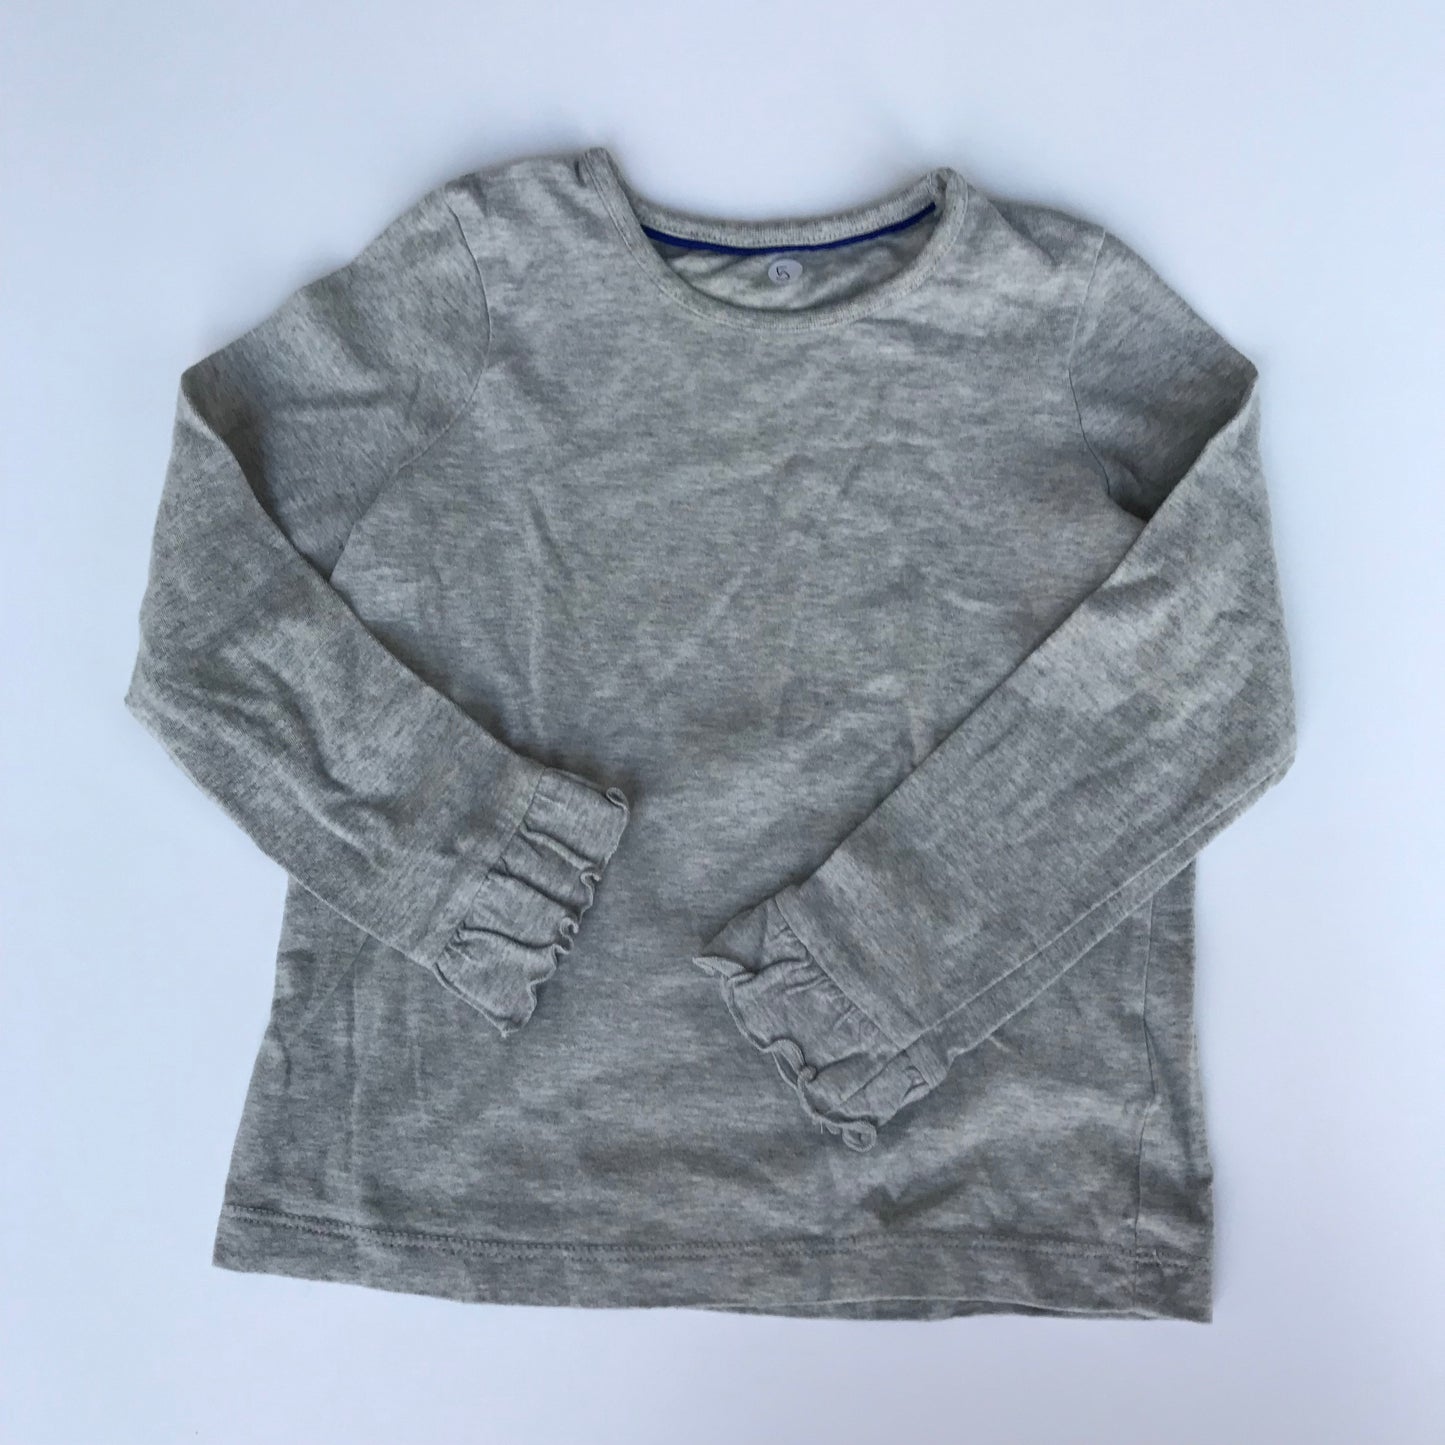 Grey Long Sleeve with Cuffs T-Shirt Age 5